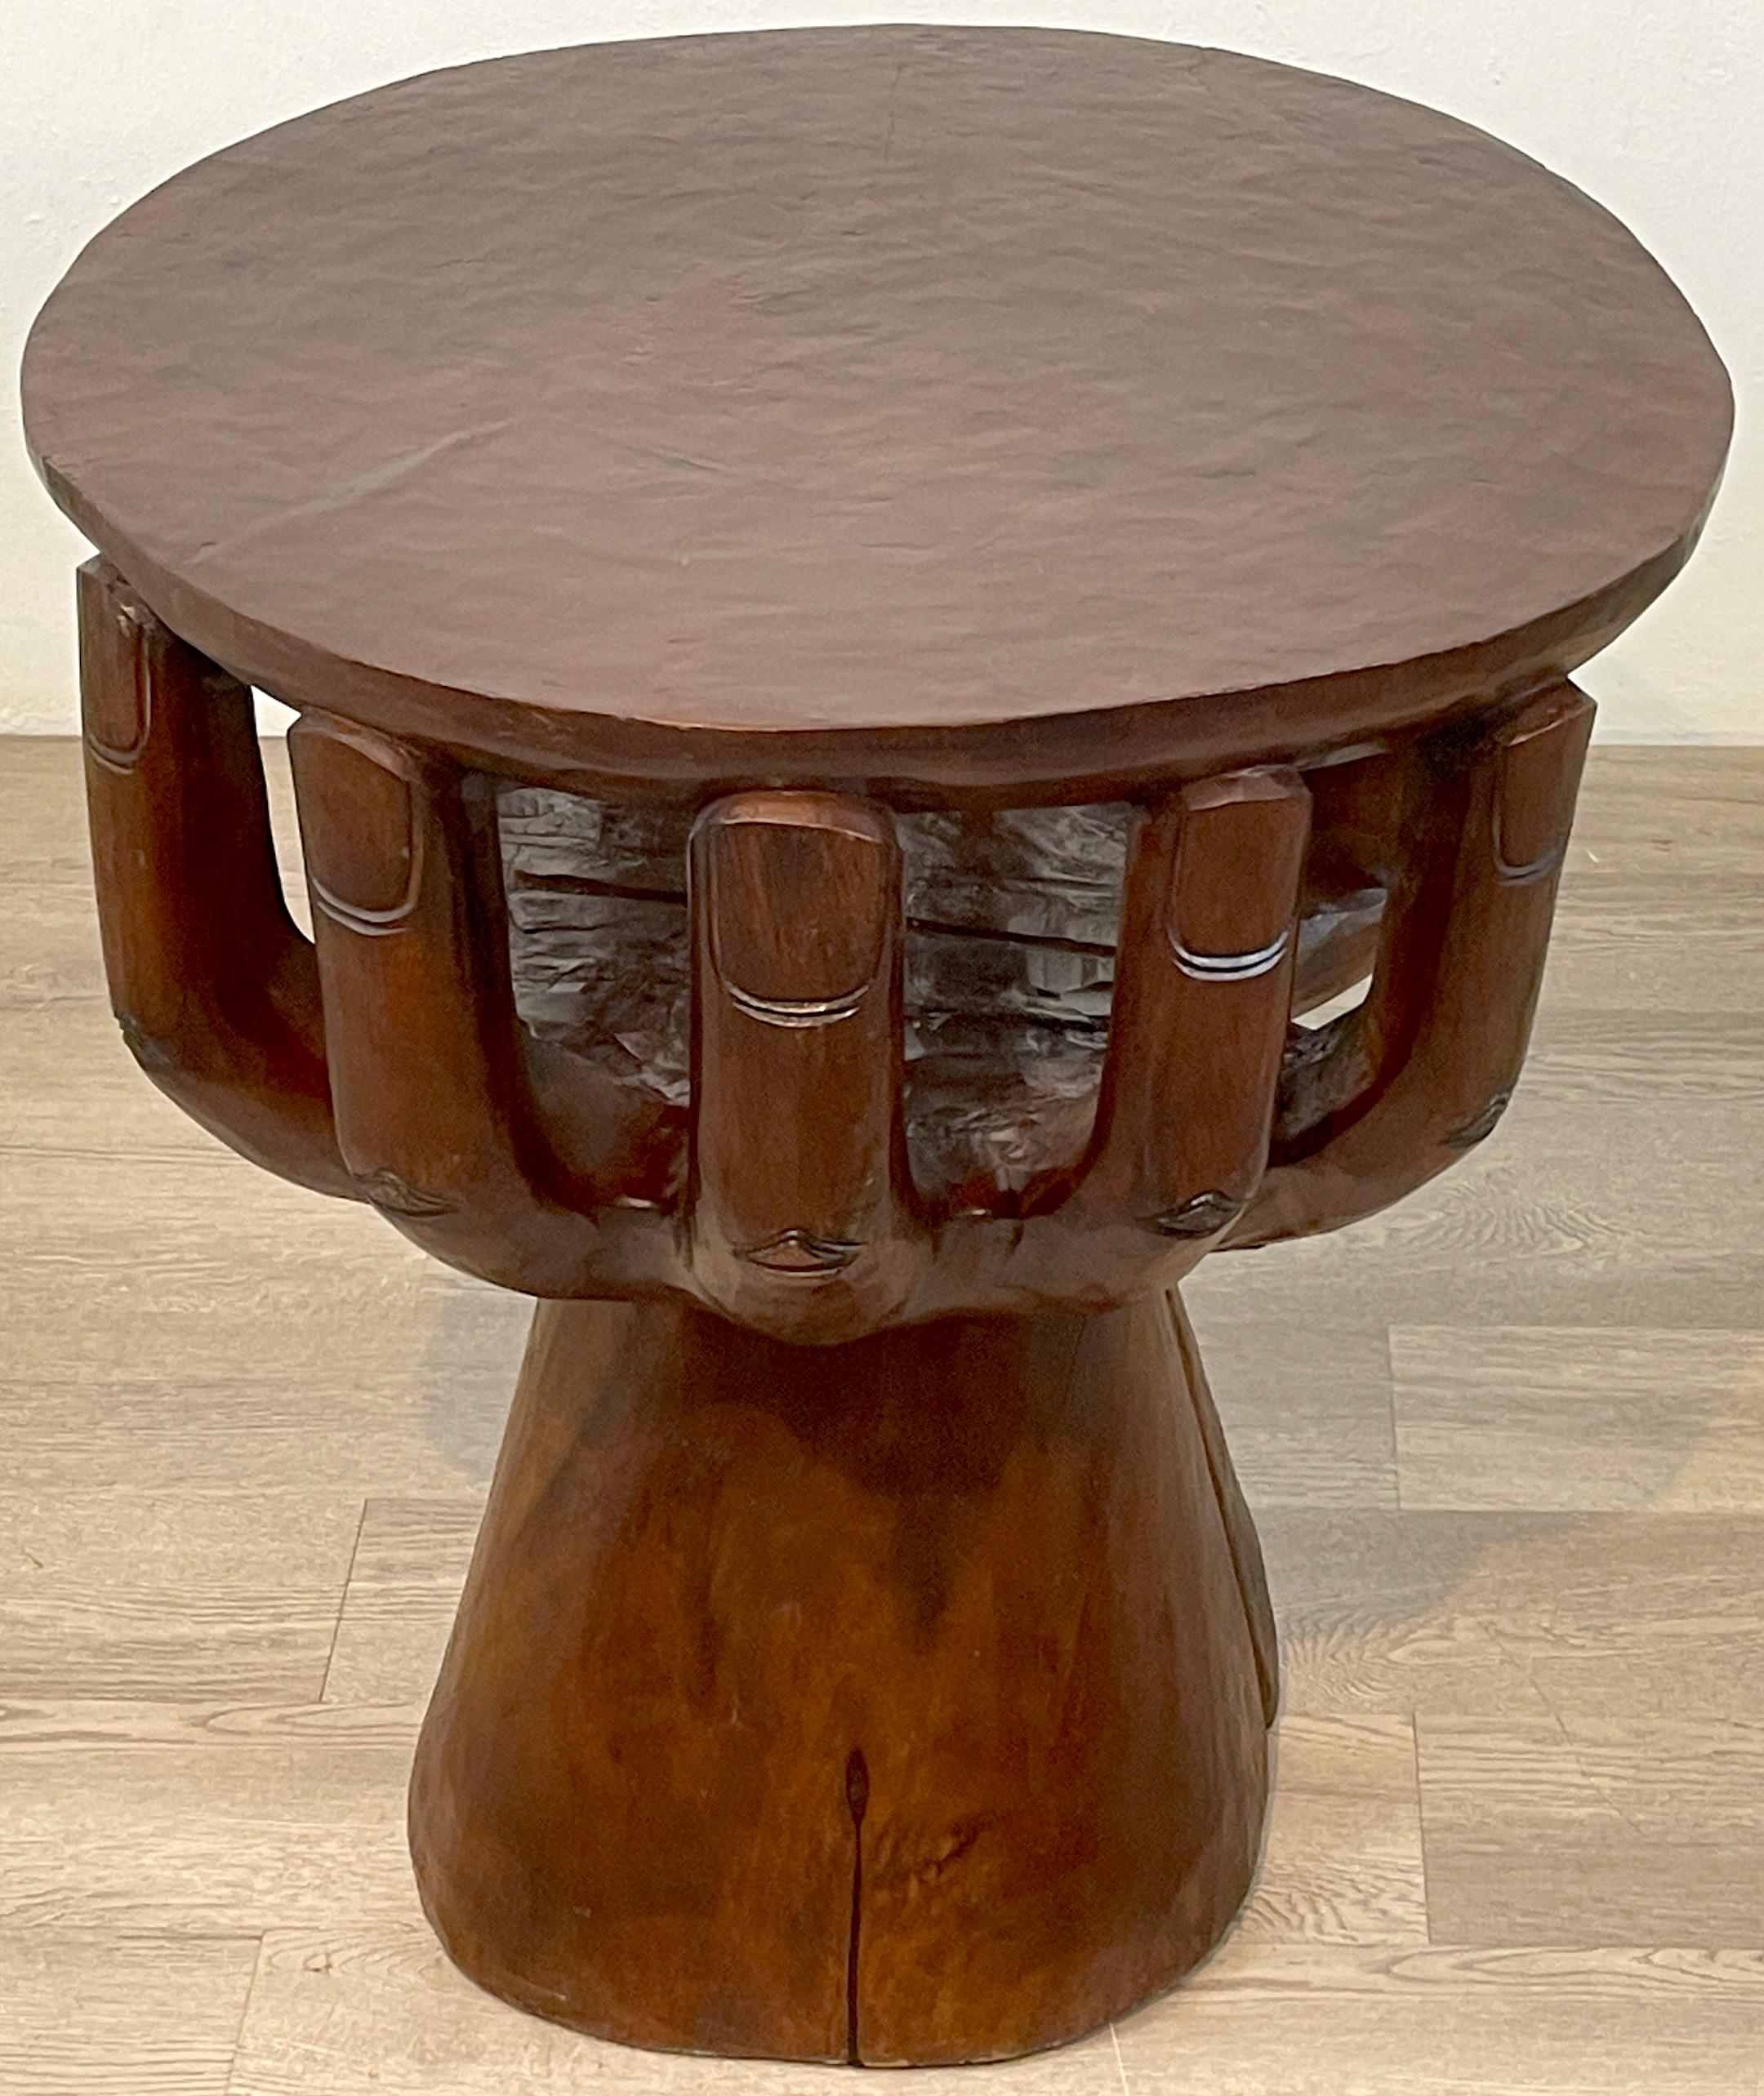 Two-Tiered Cupped Hands Table, in the Manner of Pedro Friedeberg For Sale 2